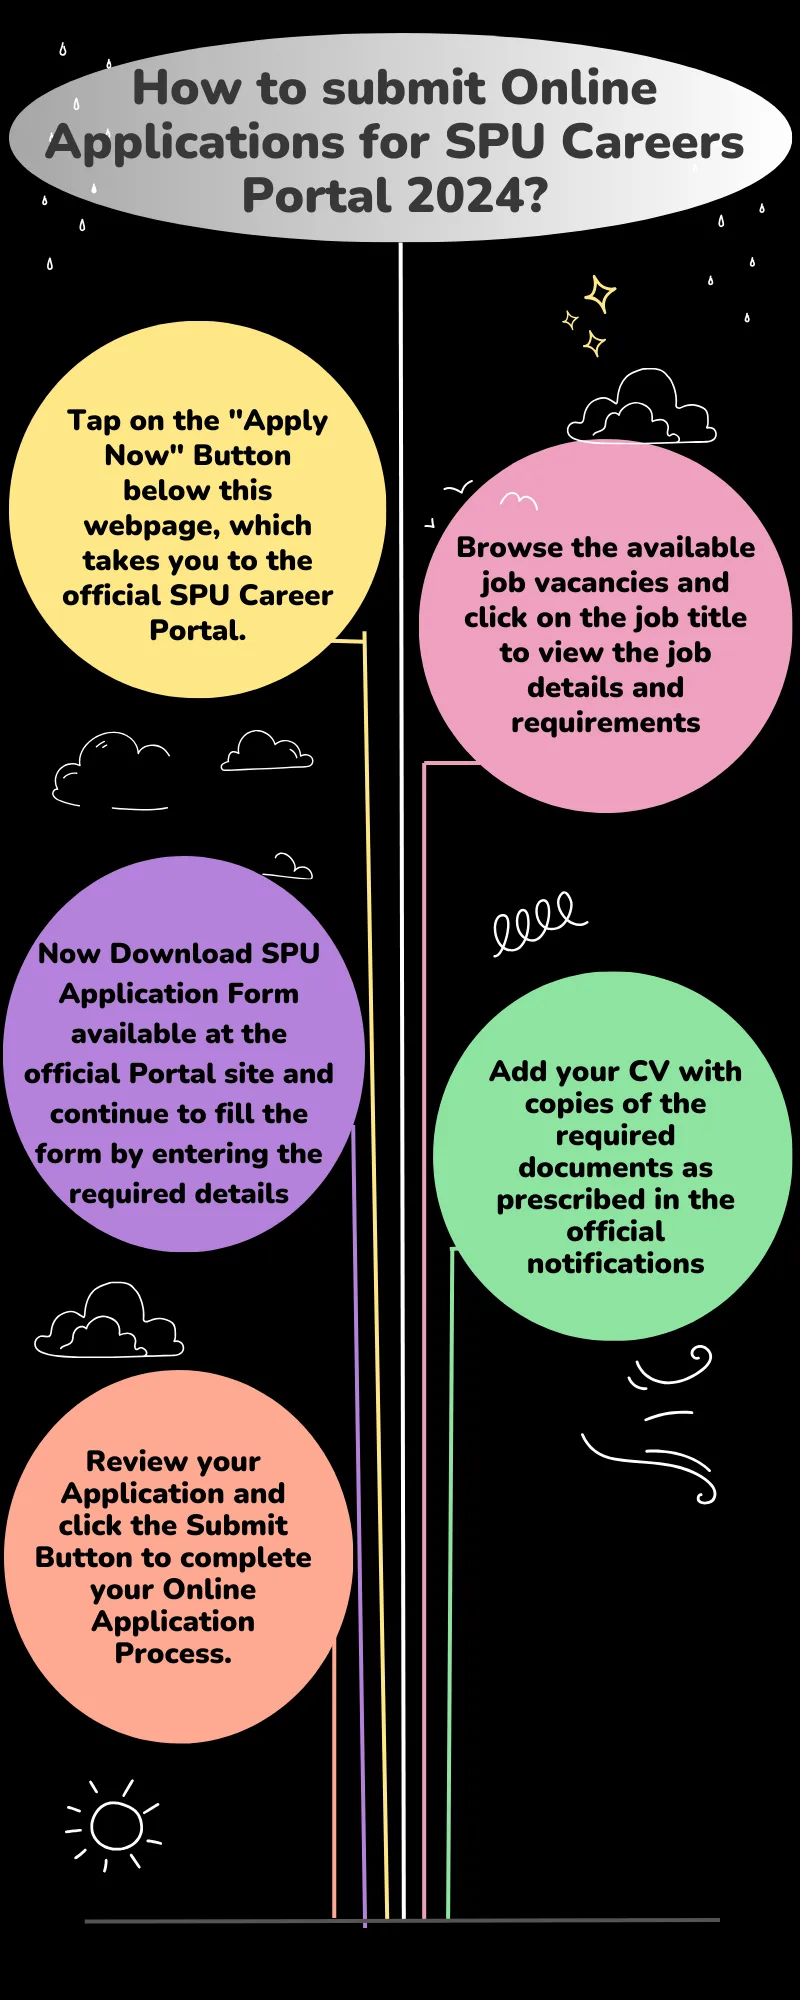 How to submit Online Applications for SPU Careers Portal 2024